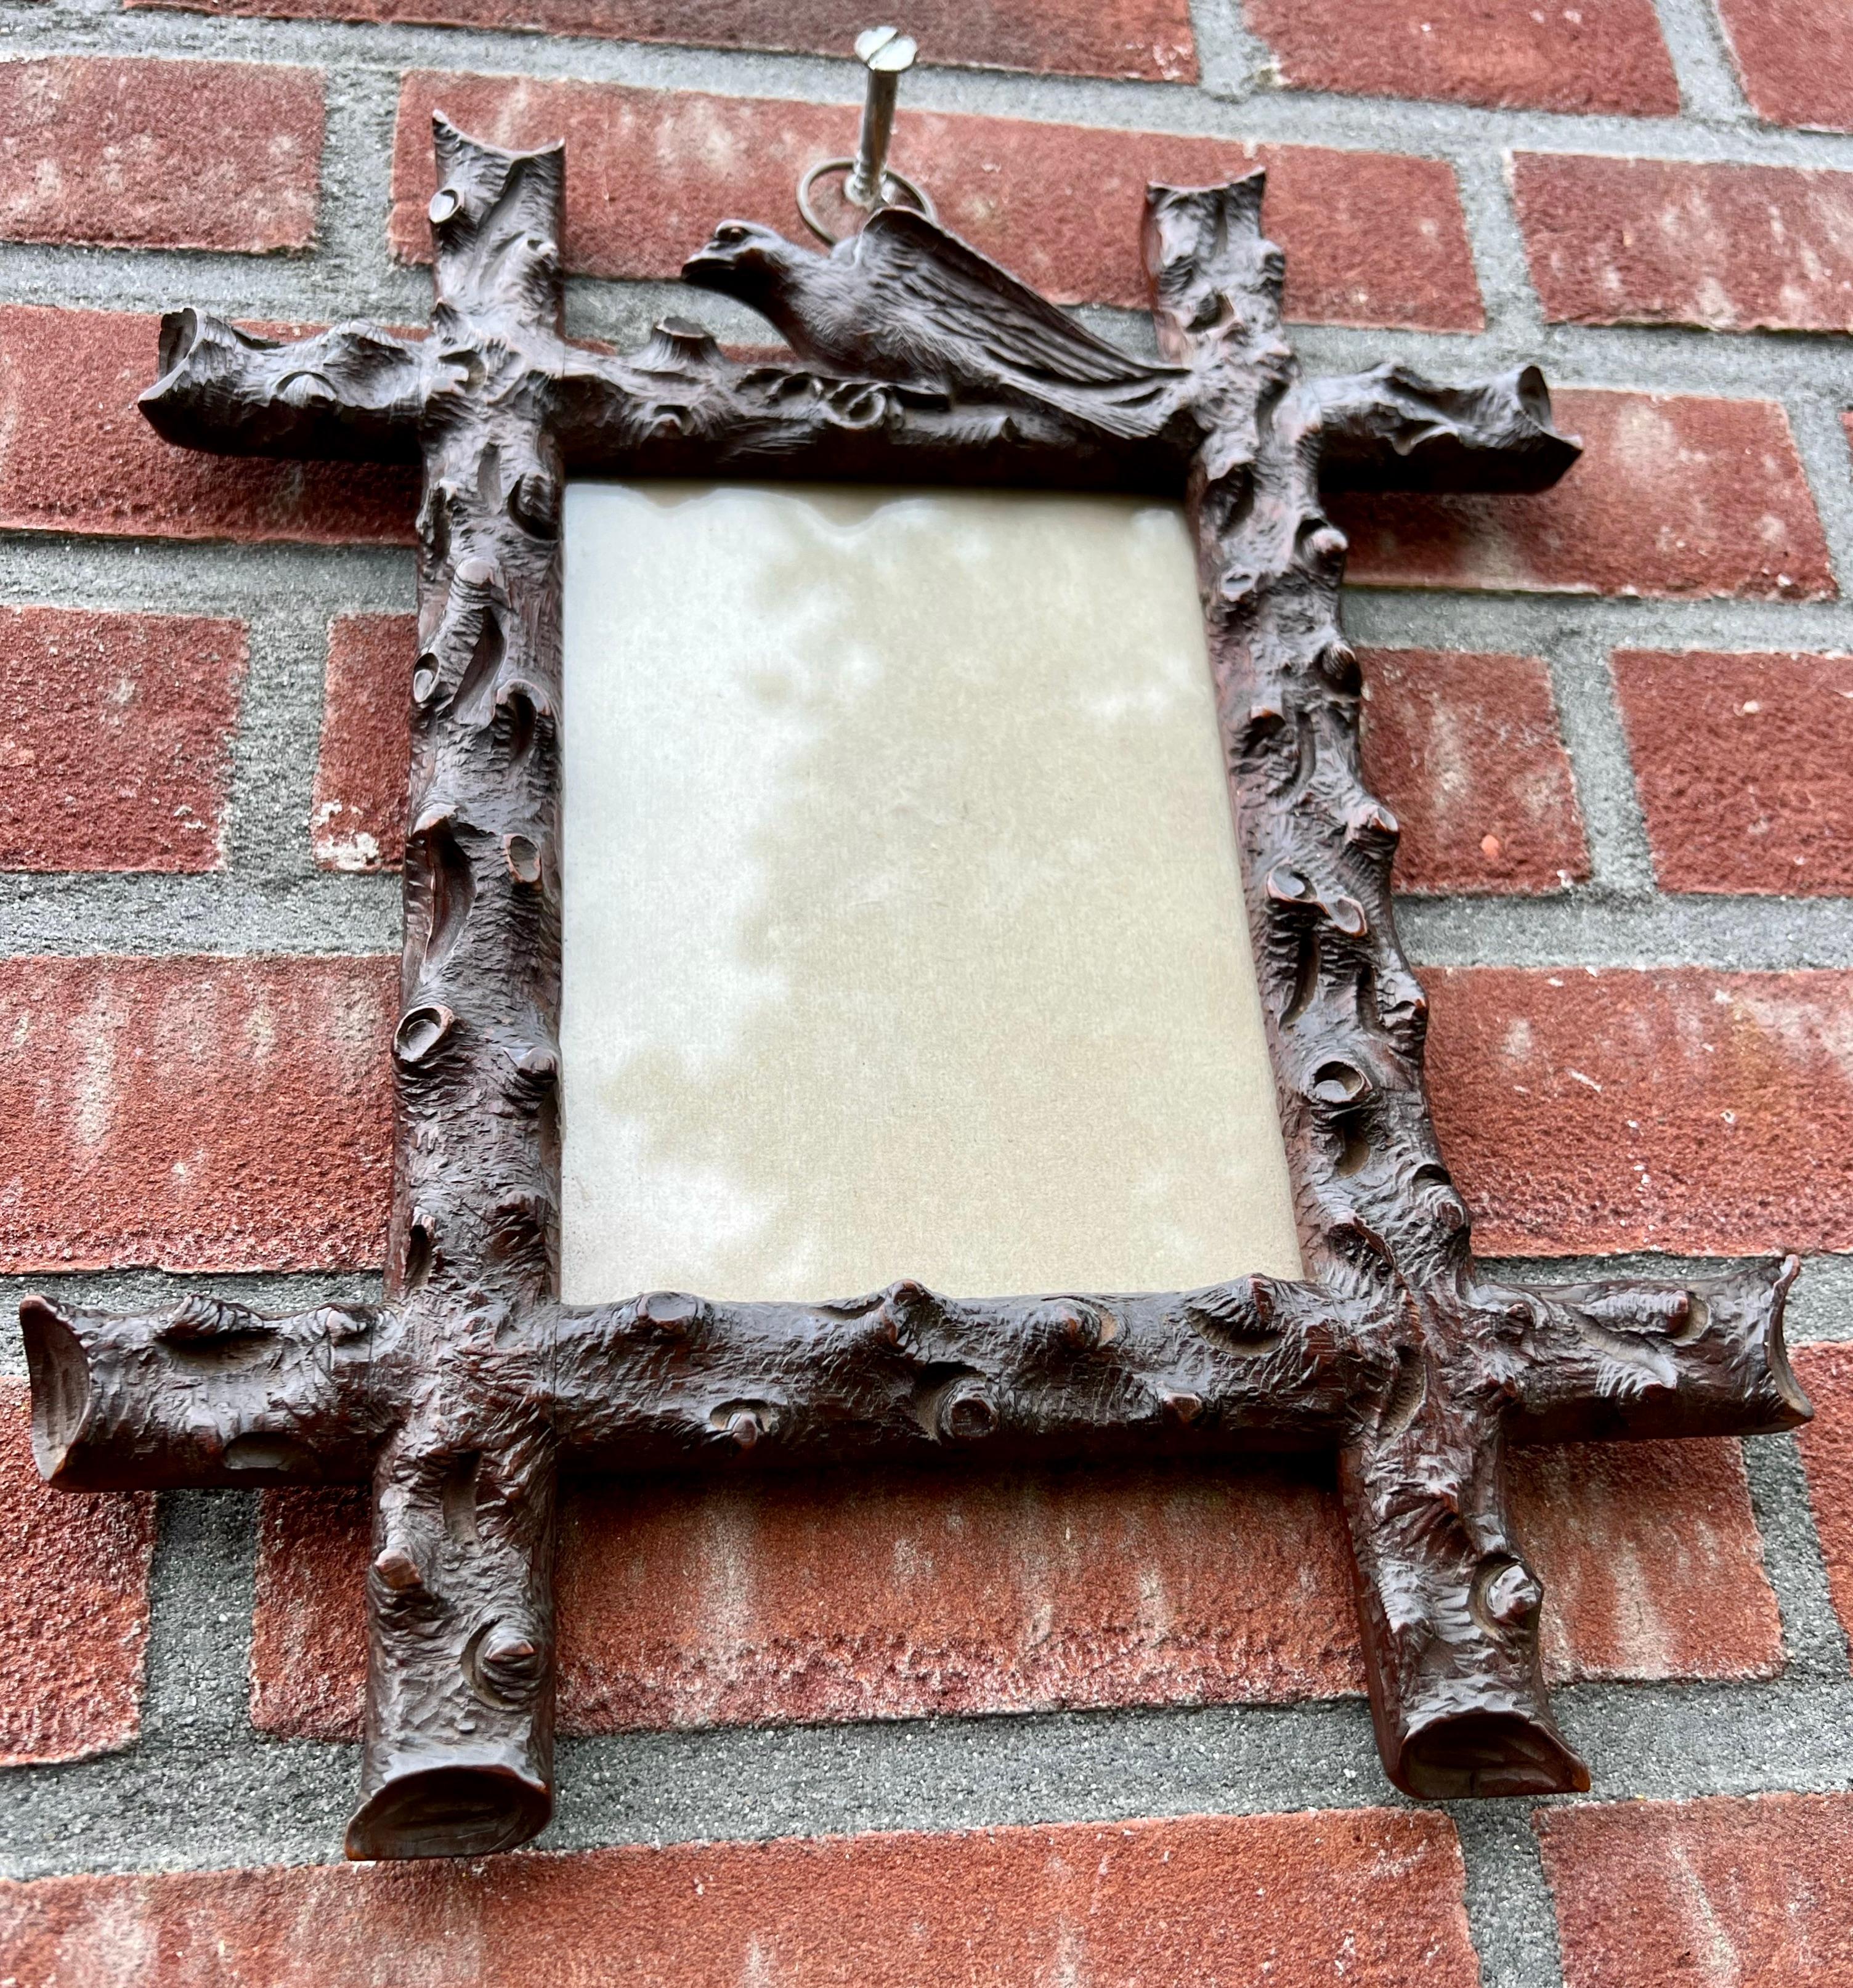 Rare and exceptionally hand carved branches-with-a-blackbird-sculpture picture frame, in mint condition.

This unique and superbly carved picture frame with a blackbird on top is another one of our wonderful recent finds. It truly is a work of art